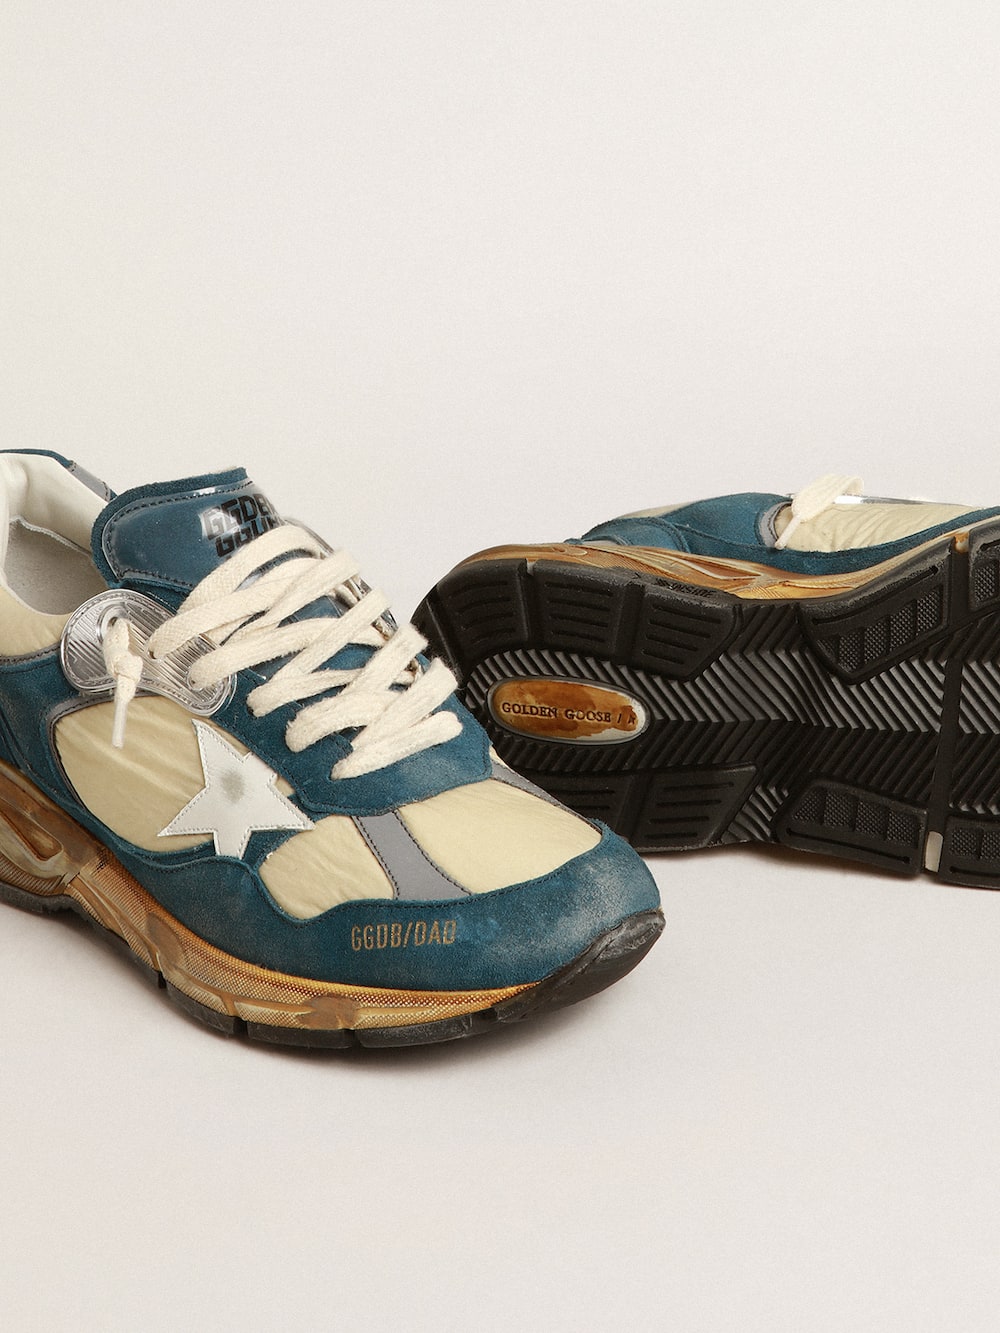 Golden Goose - Women’s Dad-Star in petrol-blue suede with white leather star in 